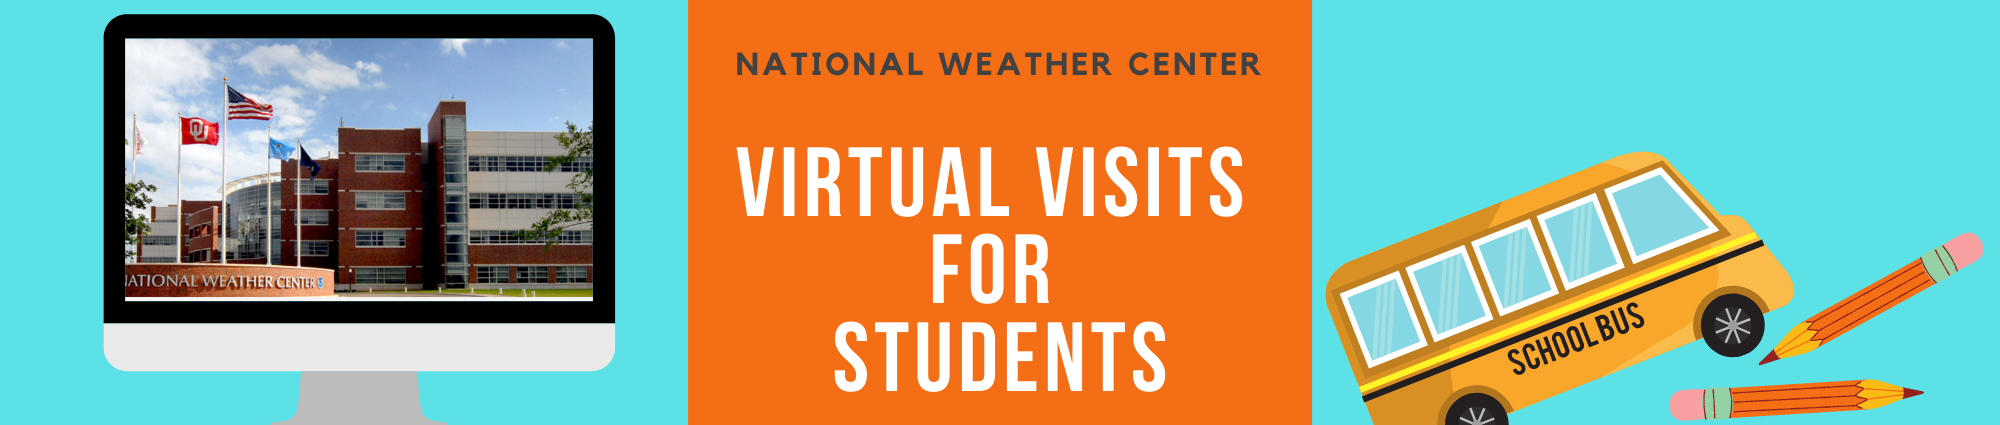 National Weather Center Virtual Visits for Students